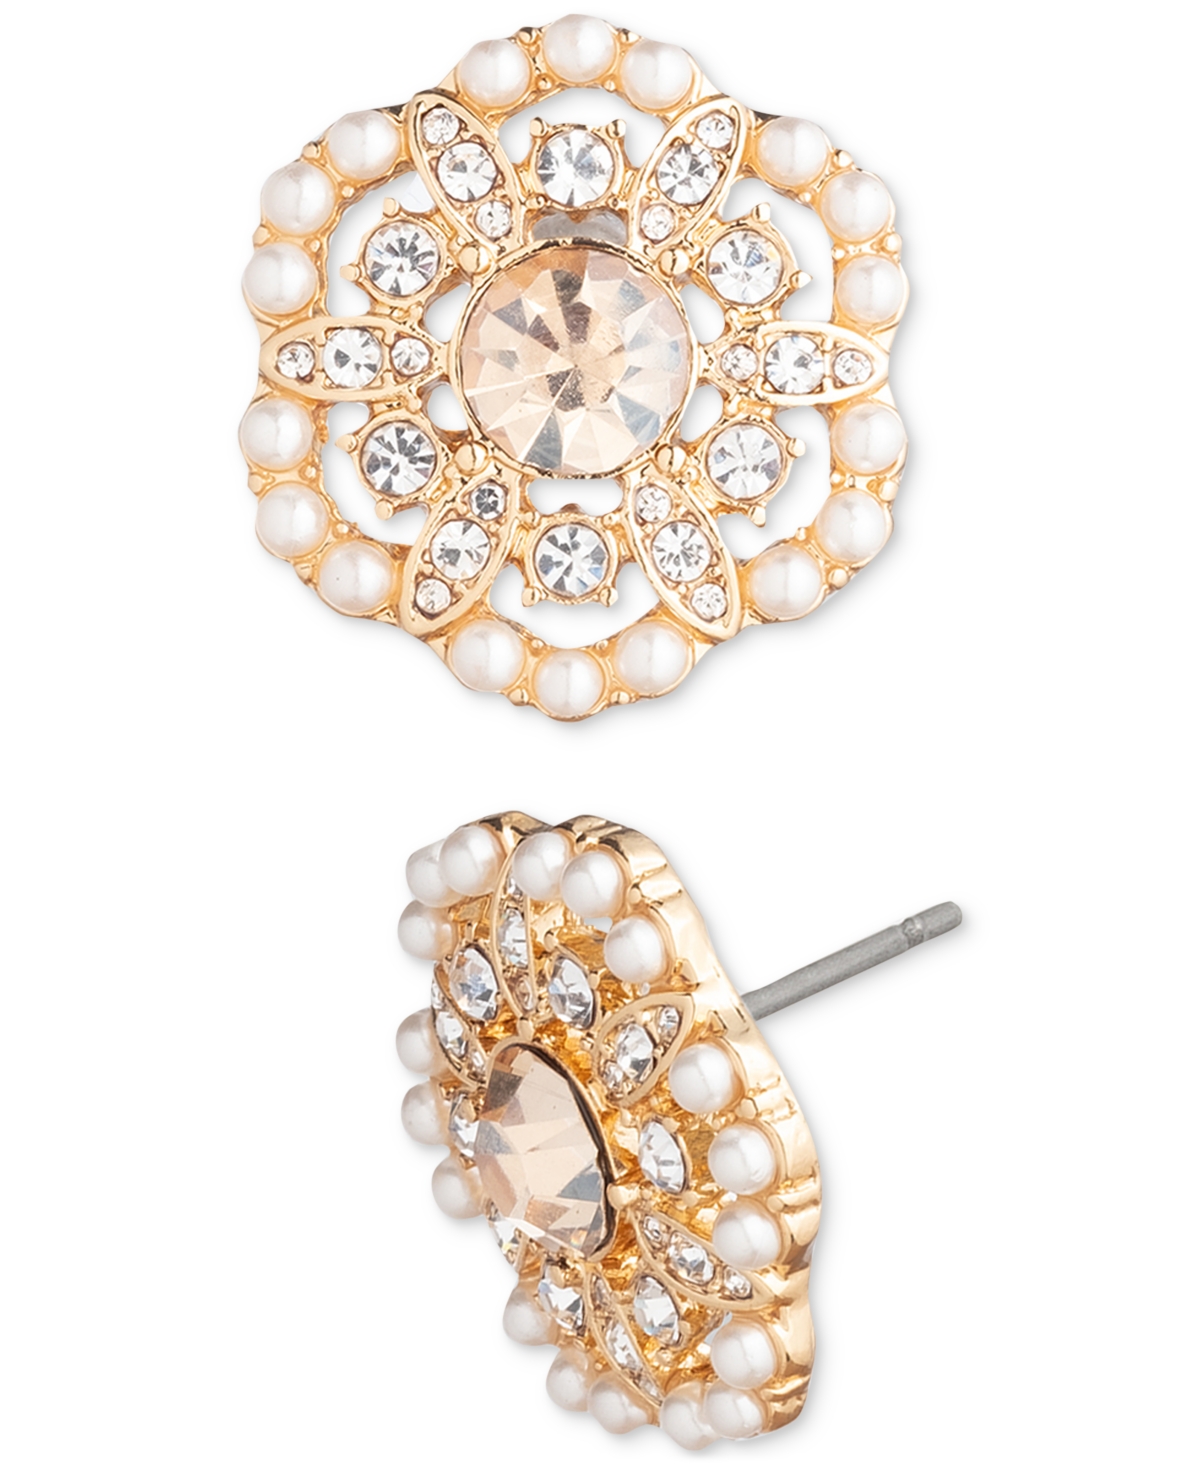 Gold-Tone Pave & Imitation Pearl Flower Stud Earrings - Gold